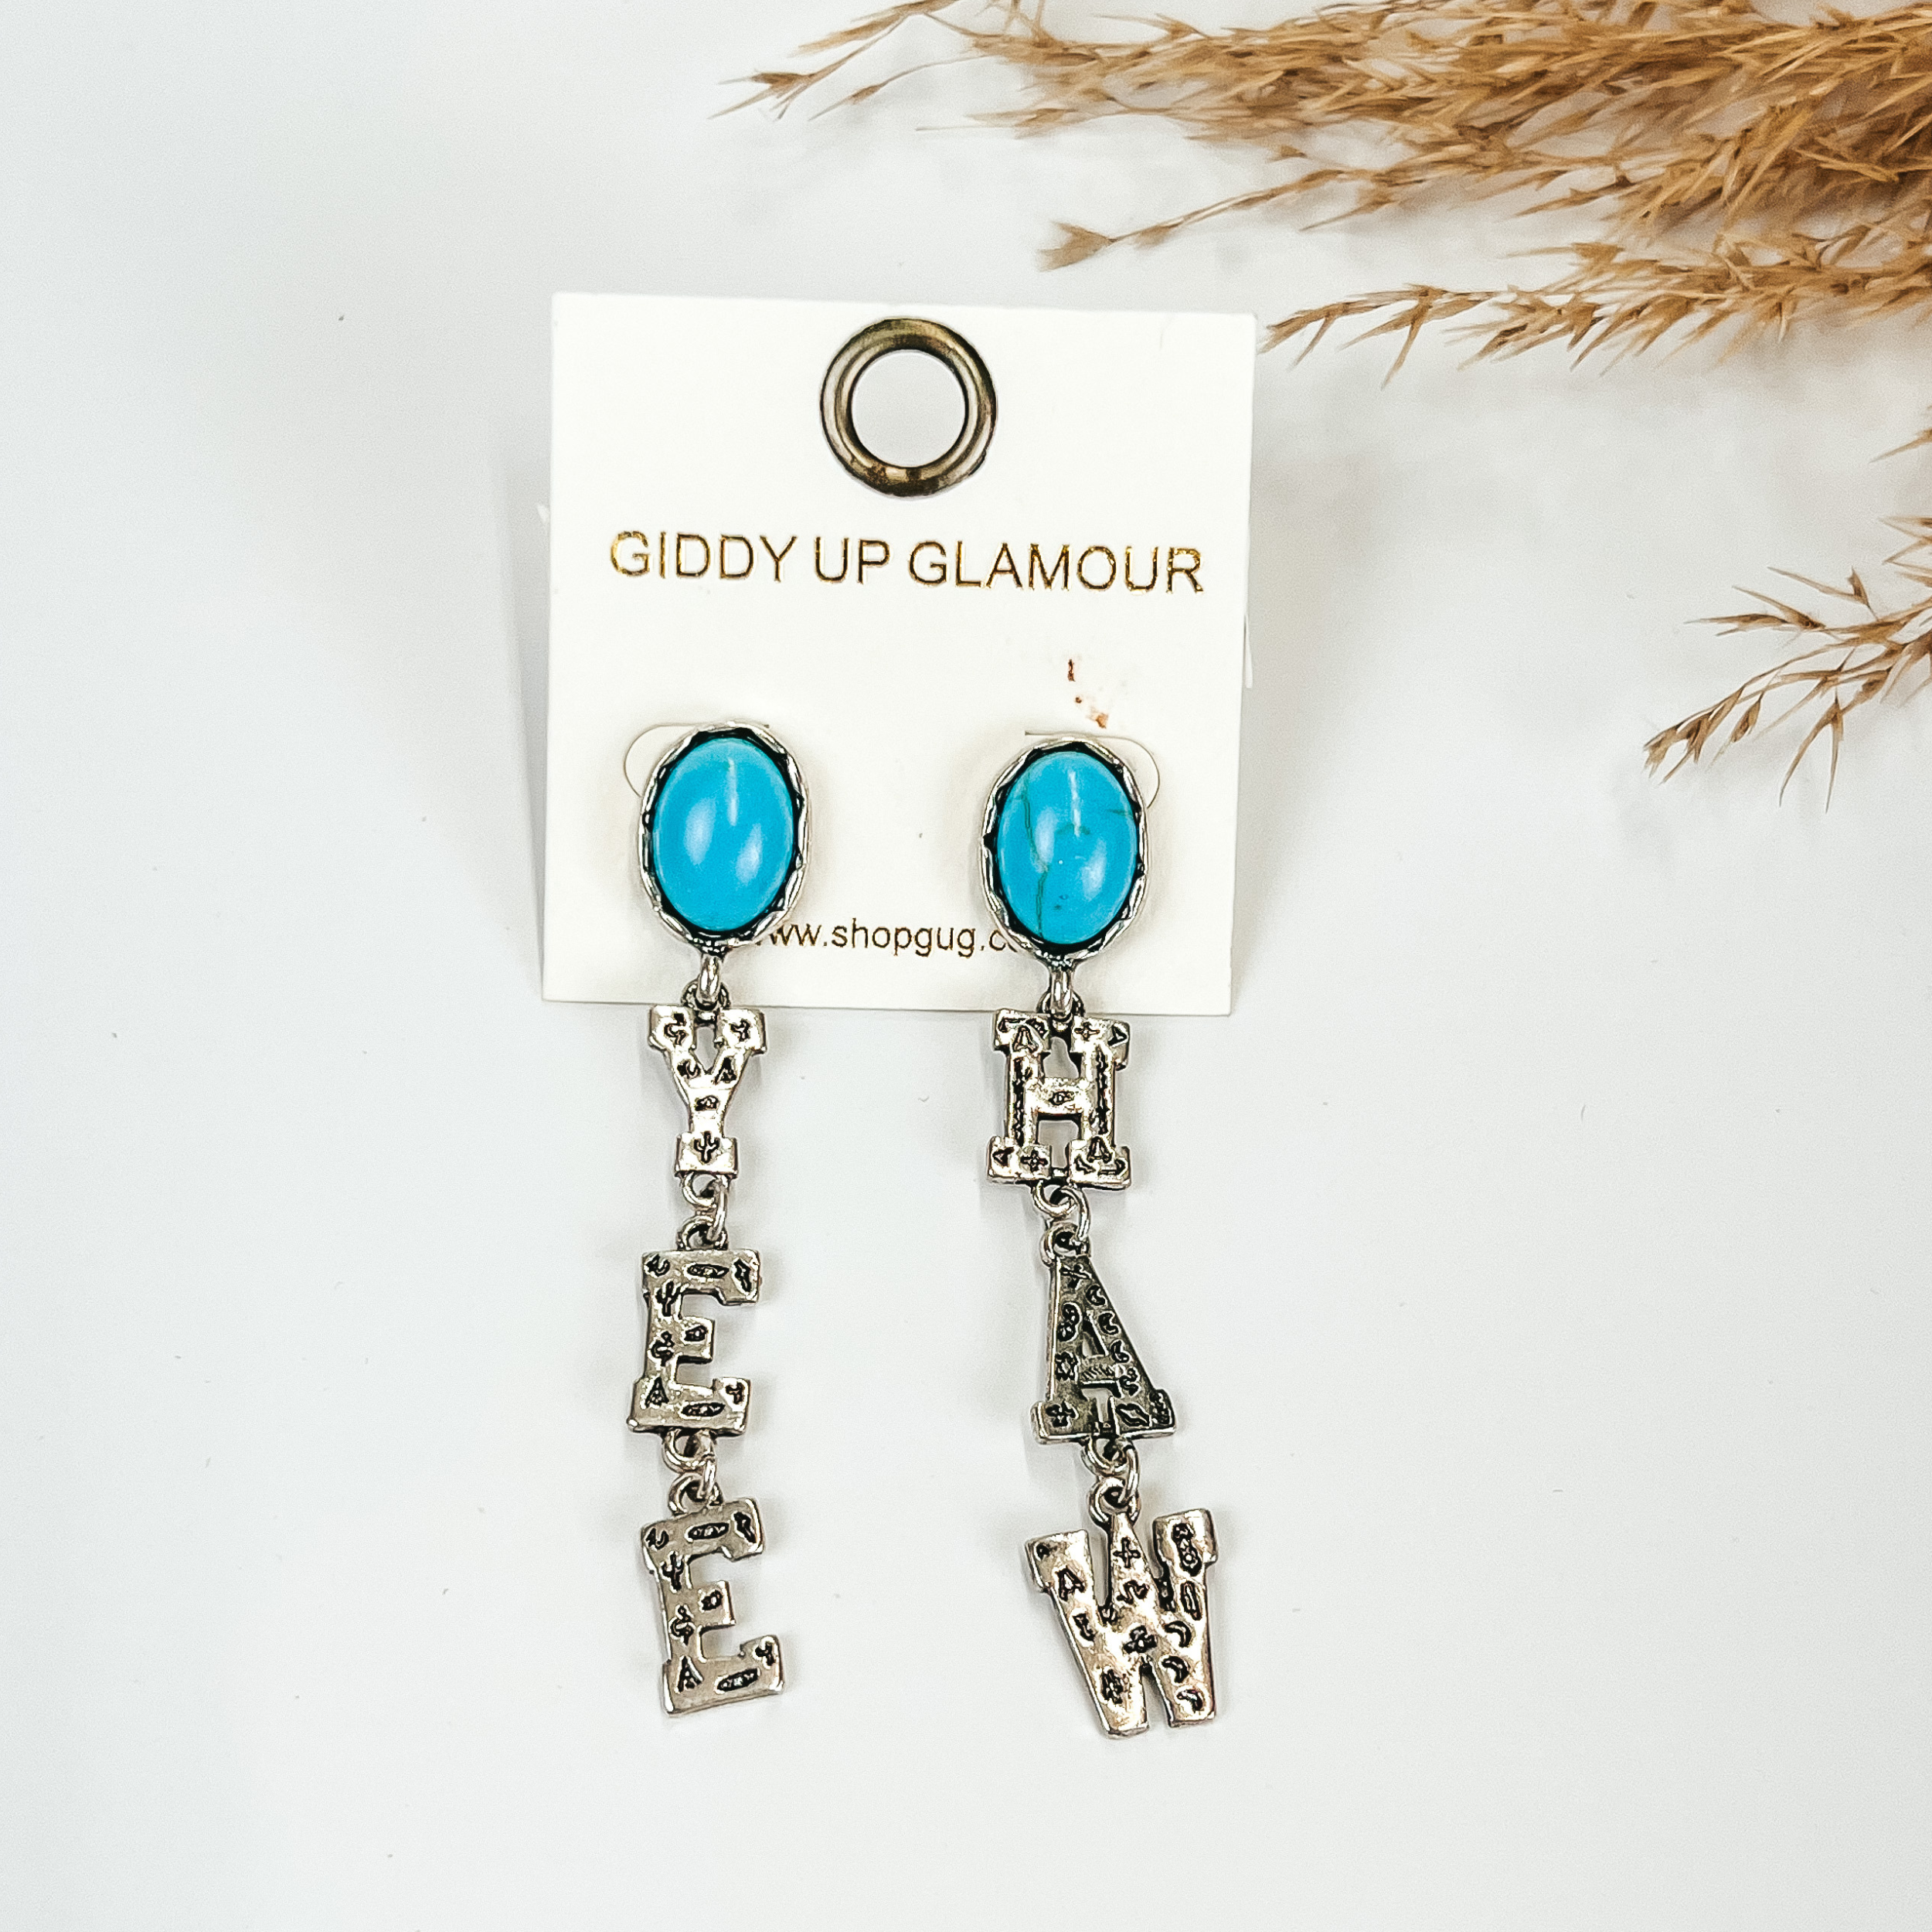 Yee Haw earrings in Silver tone with oval post back in turquoise, pictured with pampas grass, on a white background. 